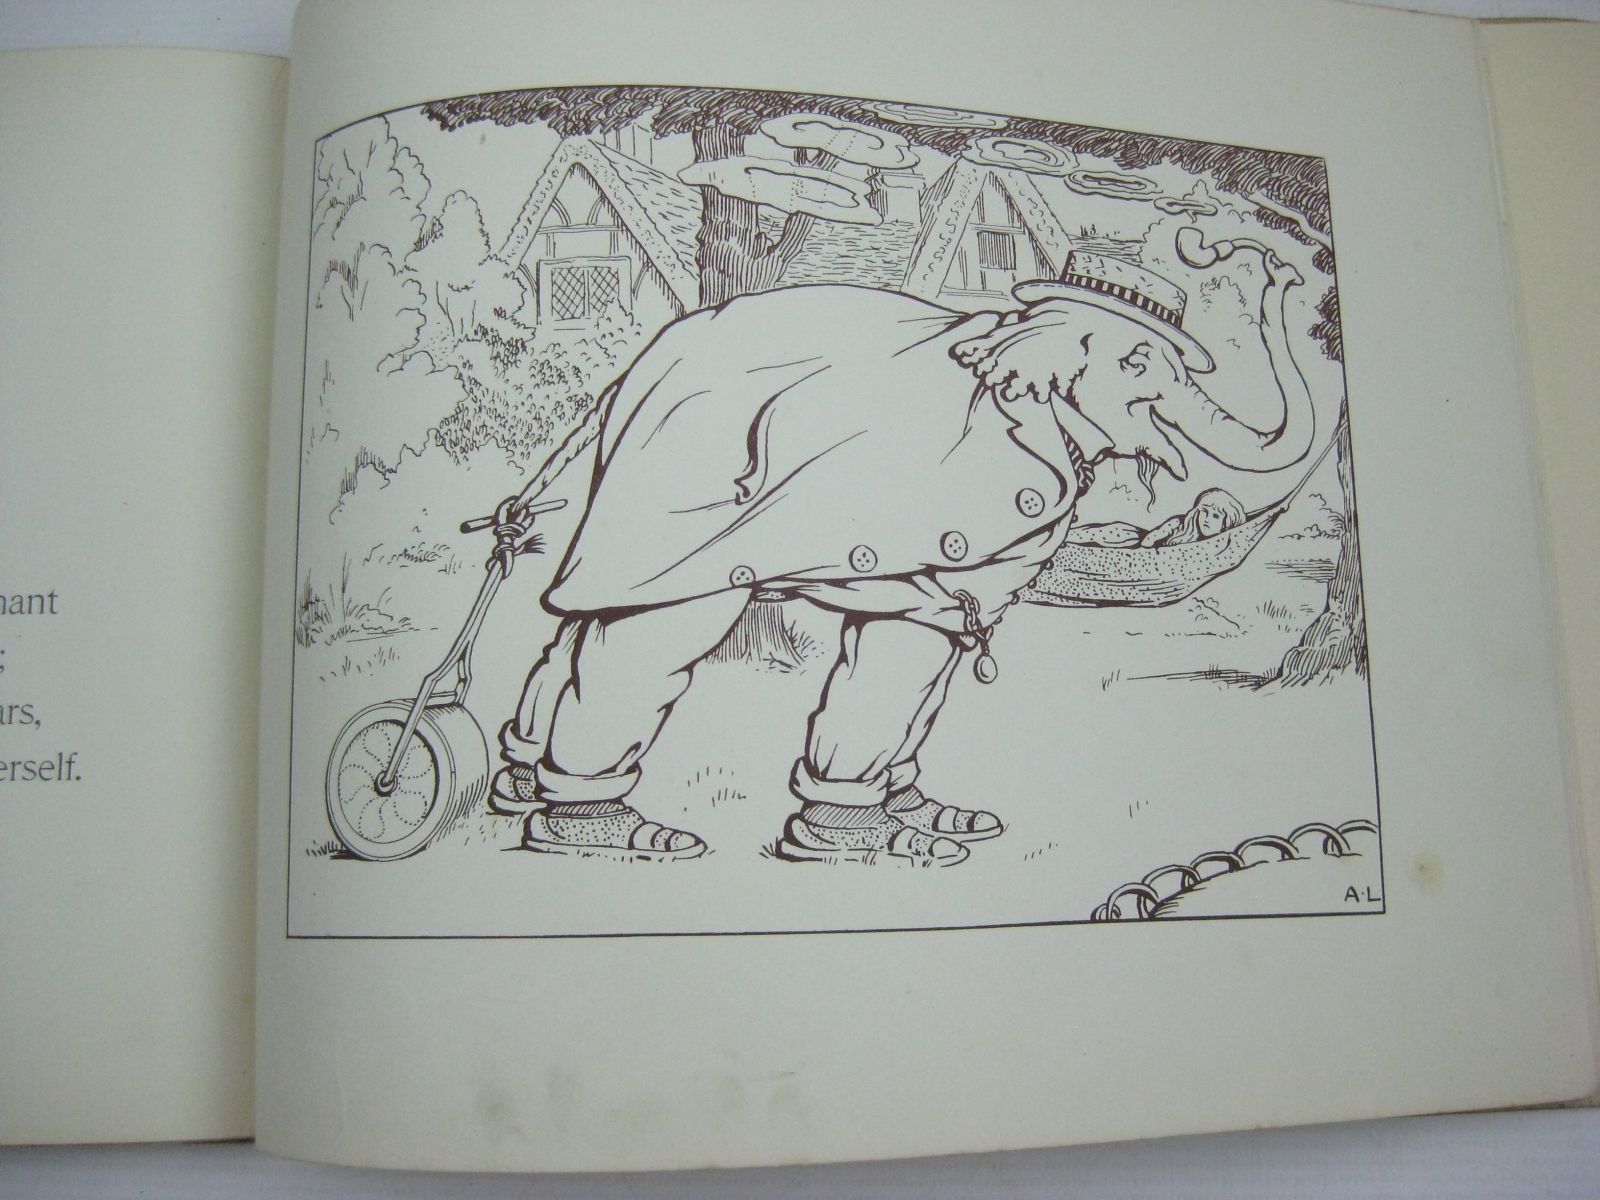 Photo of MARY'S MENAGERIE written by Layard, Arthur illustrated by Layard, Arthur published by Hurst & Blackett Ltd. (STOCK CODE: 1315484)  for sale by Stella & Rose's Books